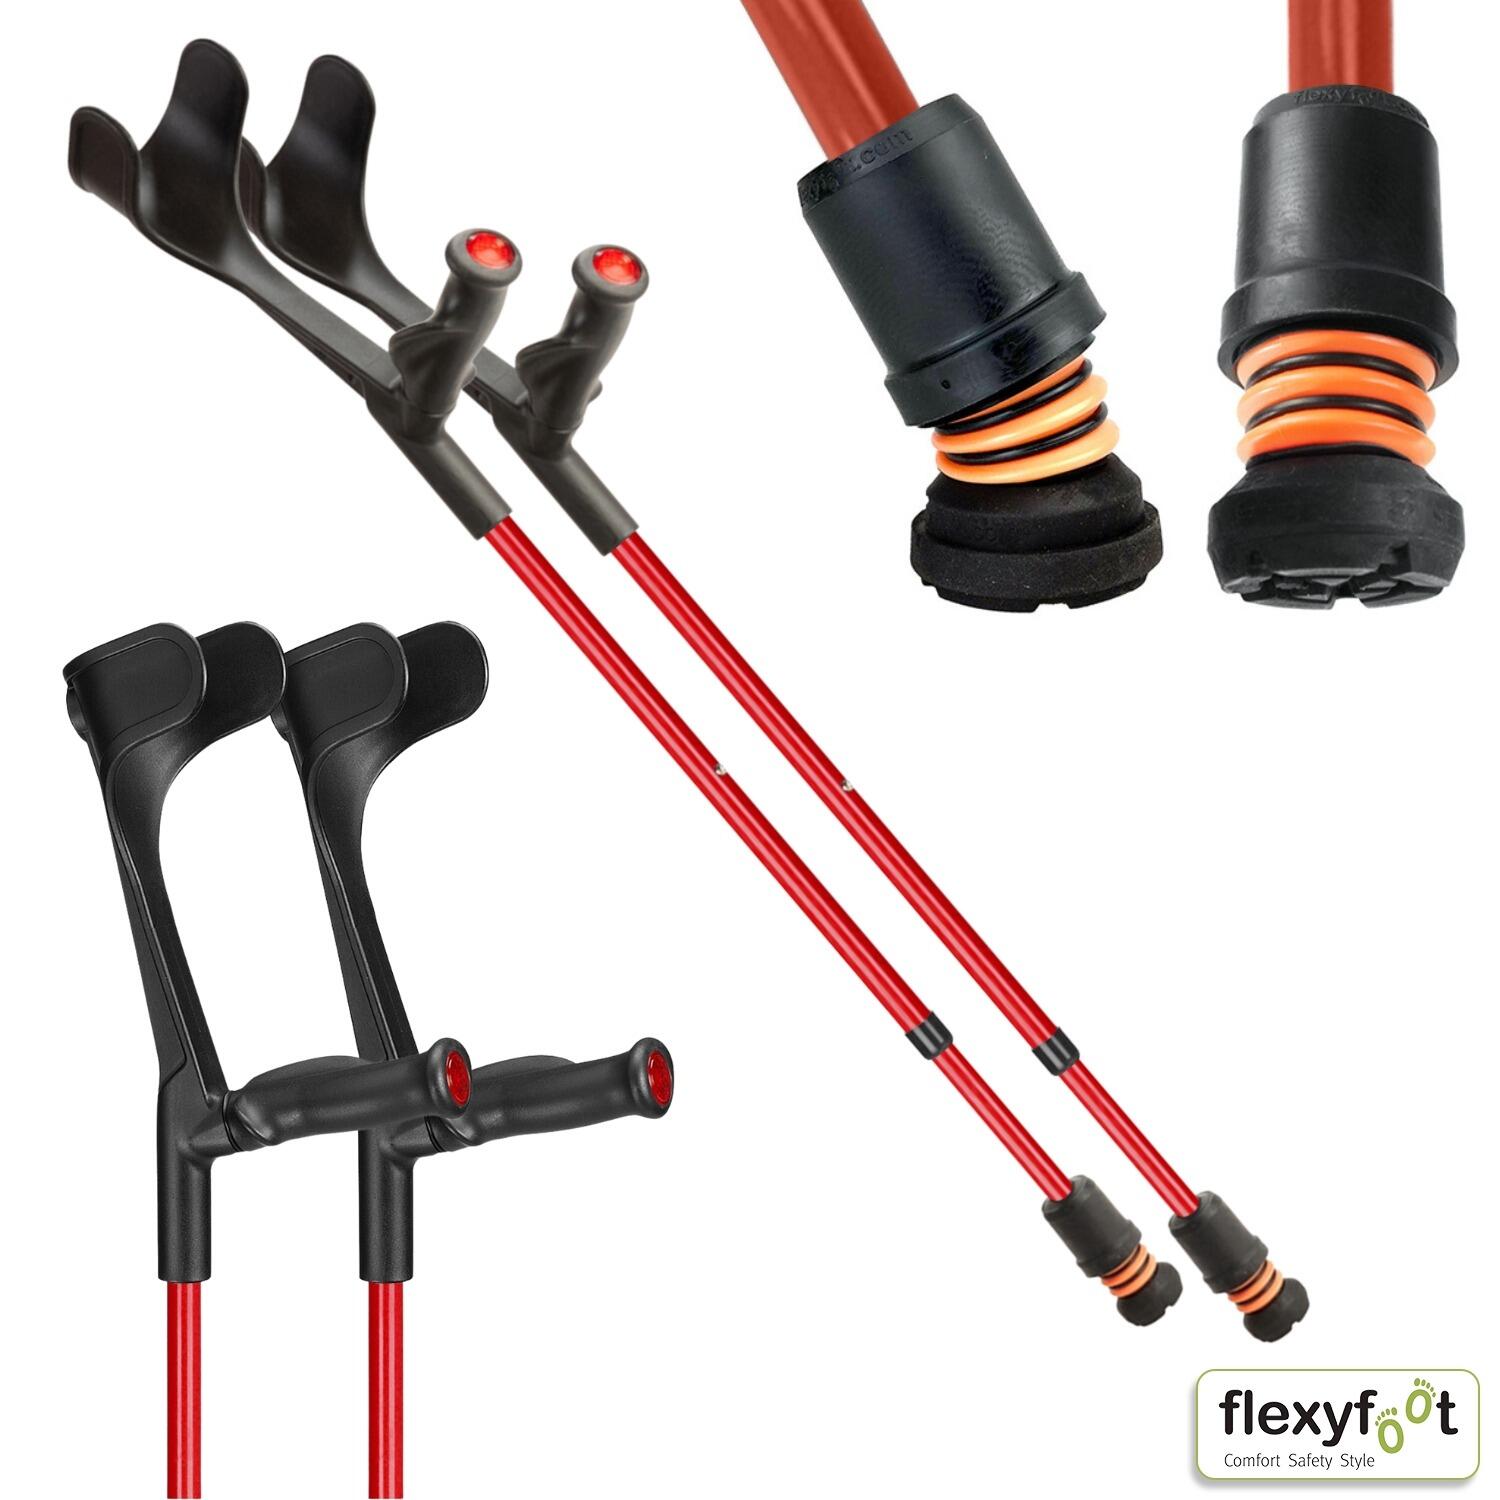 A pair of red Flexyfoot Comfort Grip Open Cuff Crutches